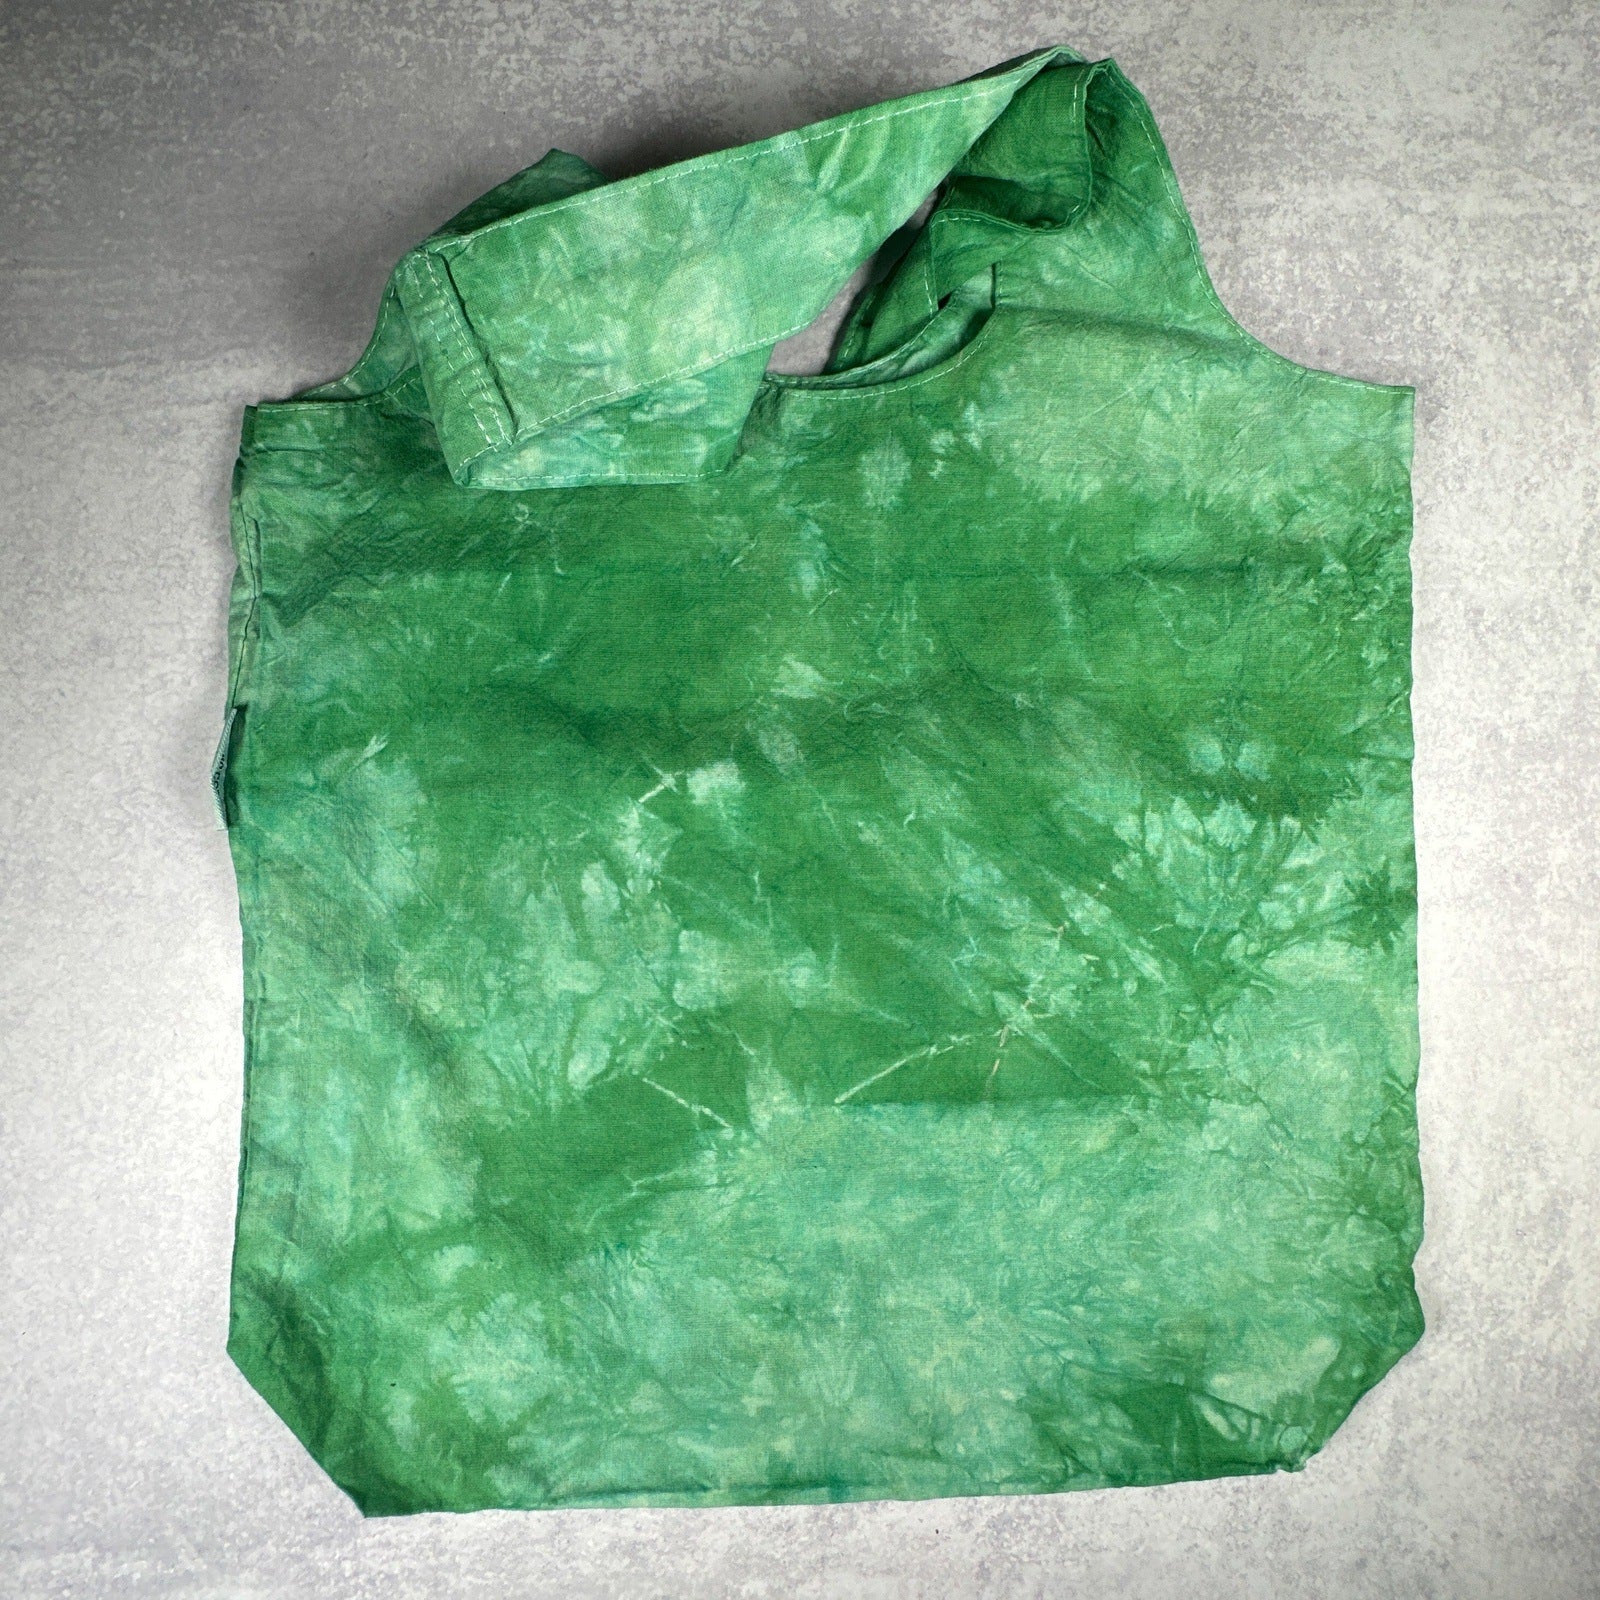 Green Tie-dye Jumping Spider Tote Bag - The Serpentry